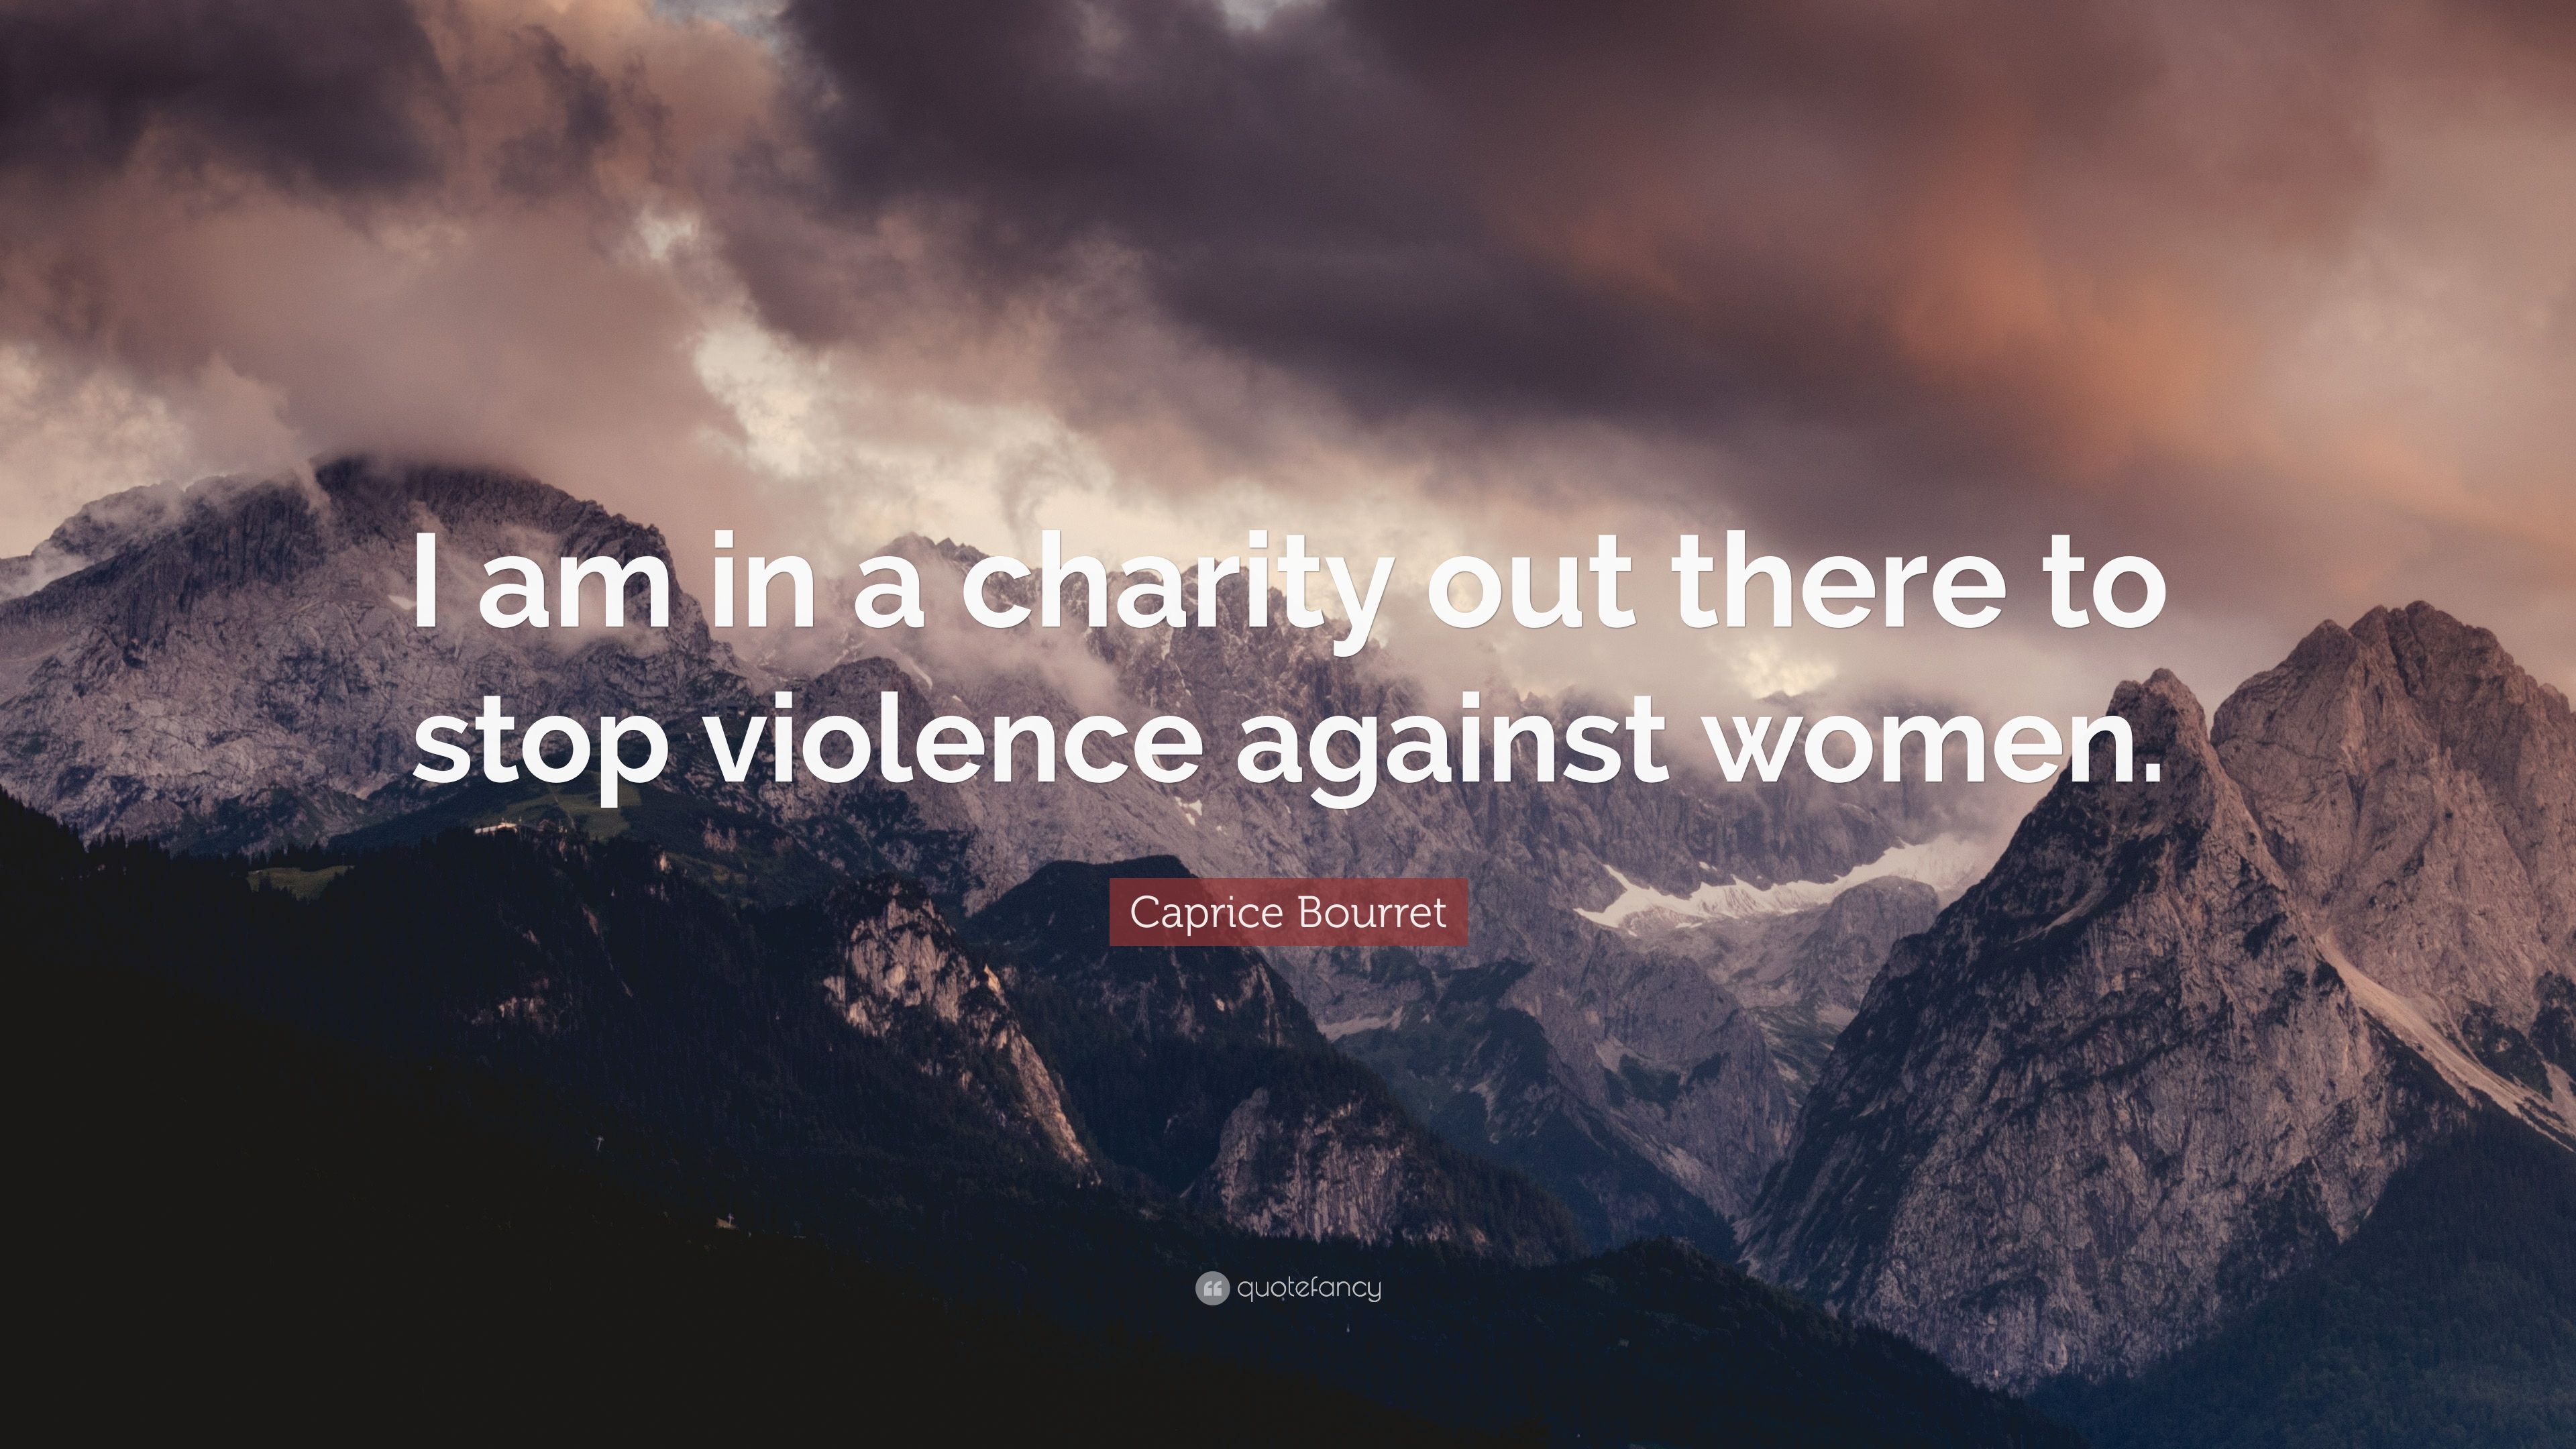 Caprice Bourret Quote: “I am in a charity out there to stop